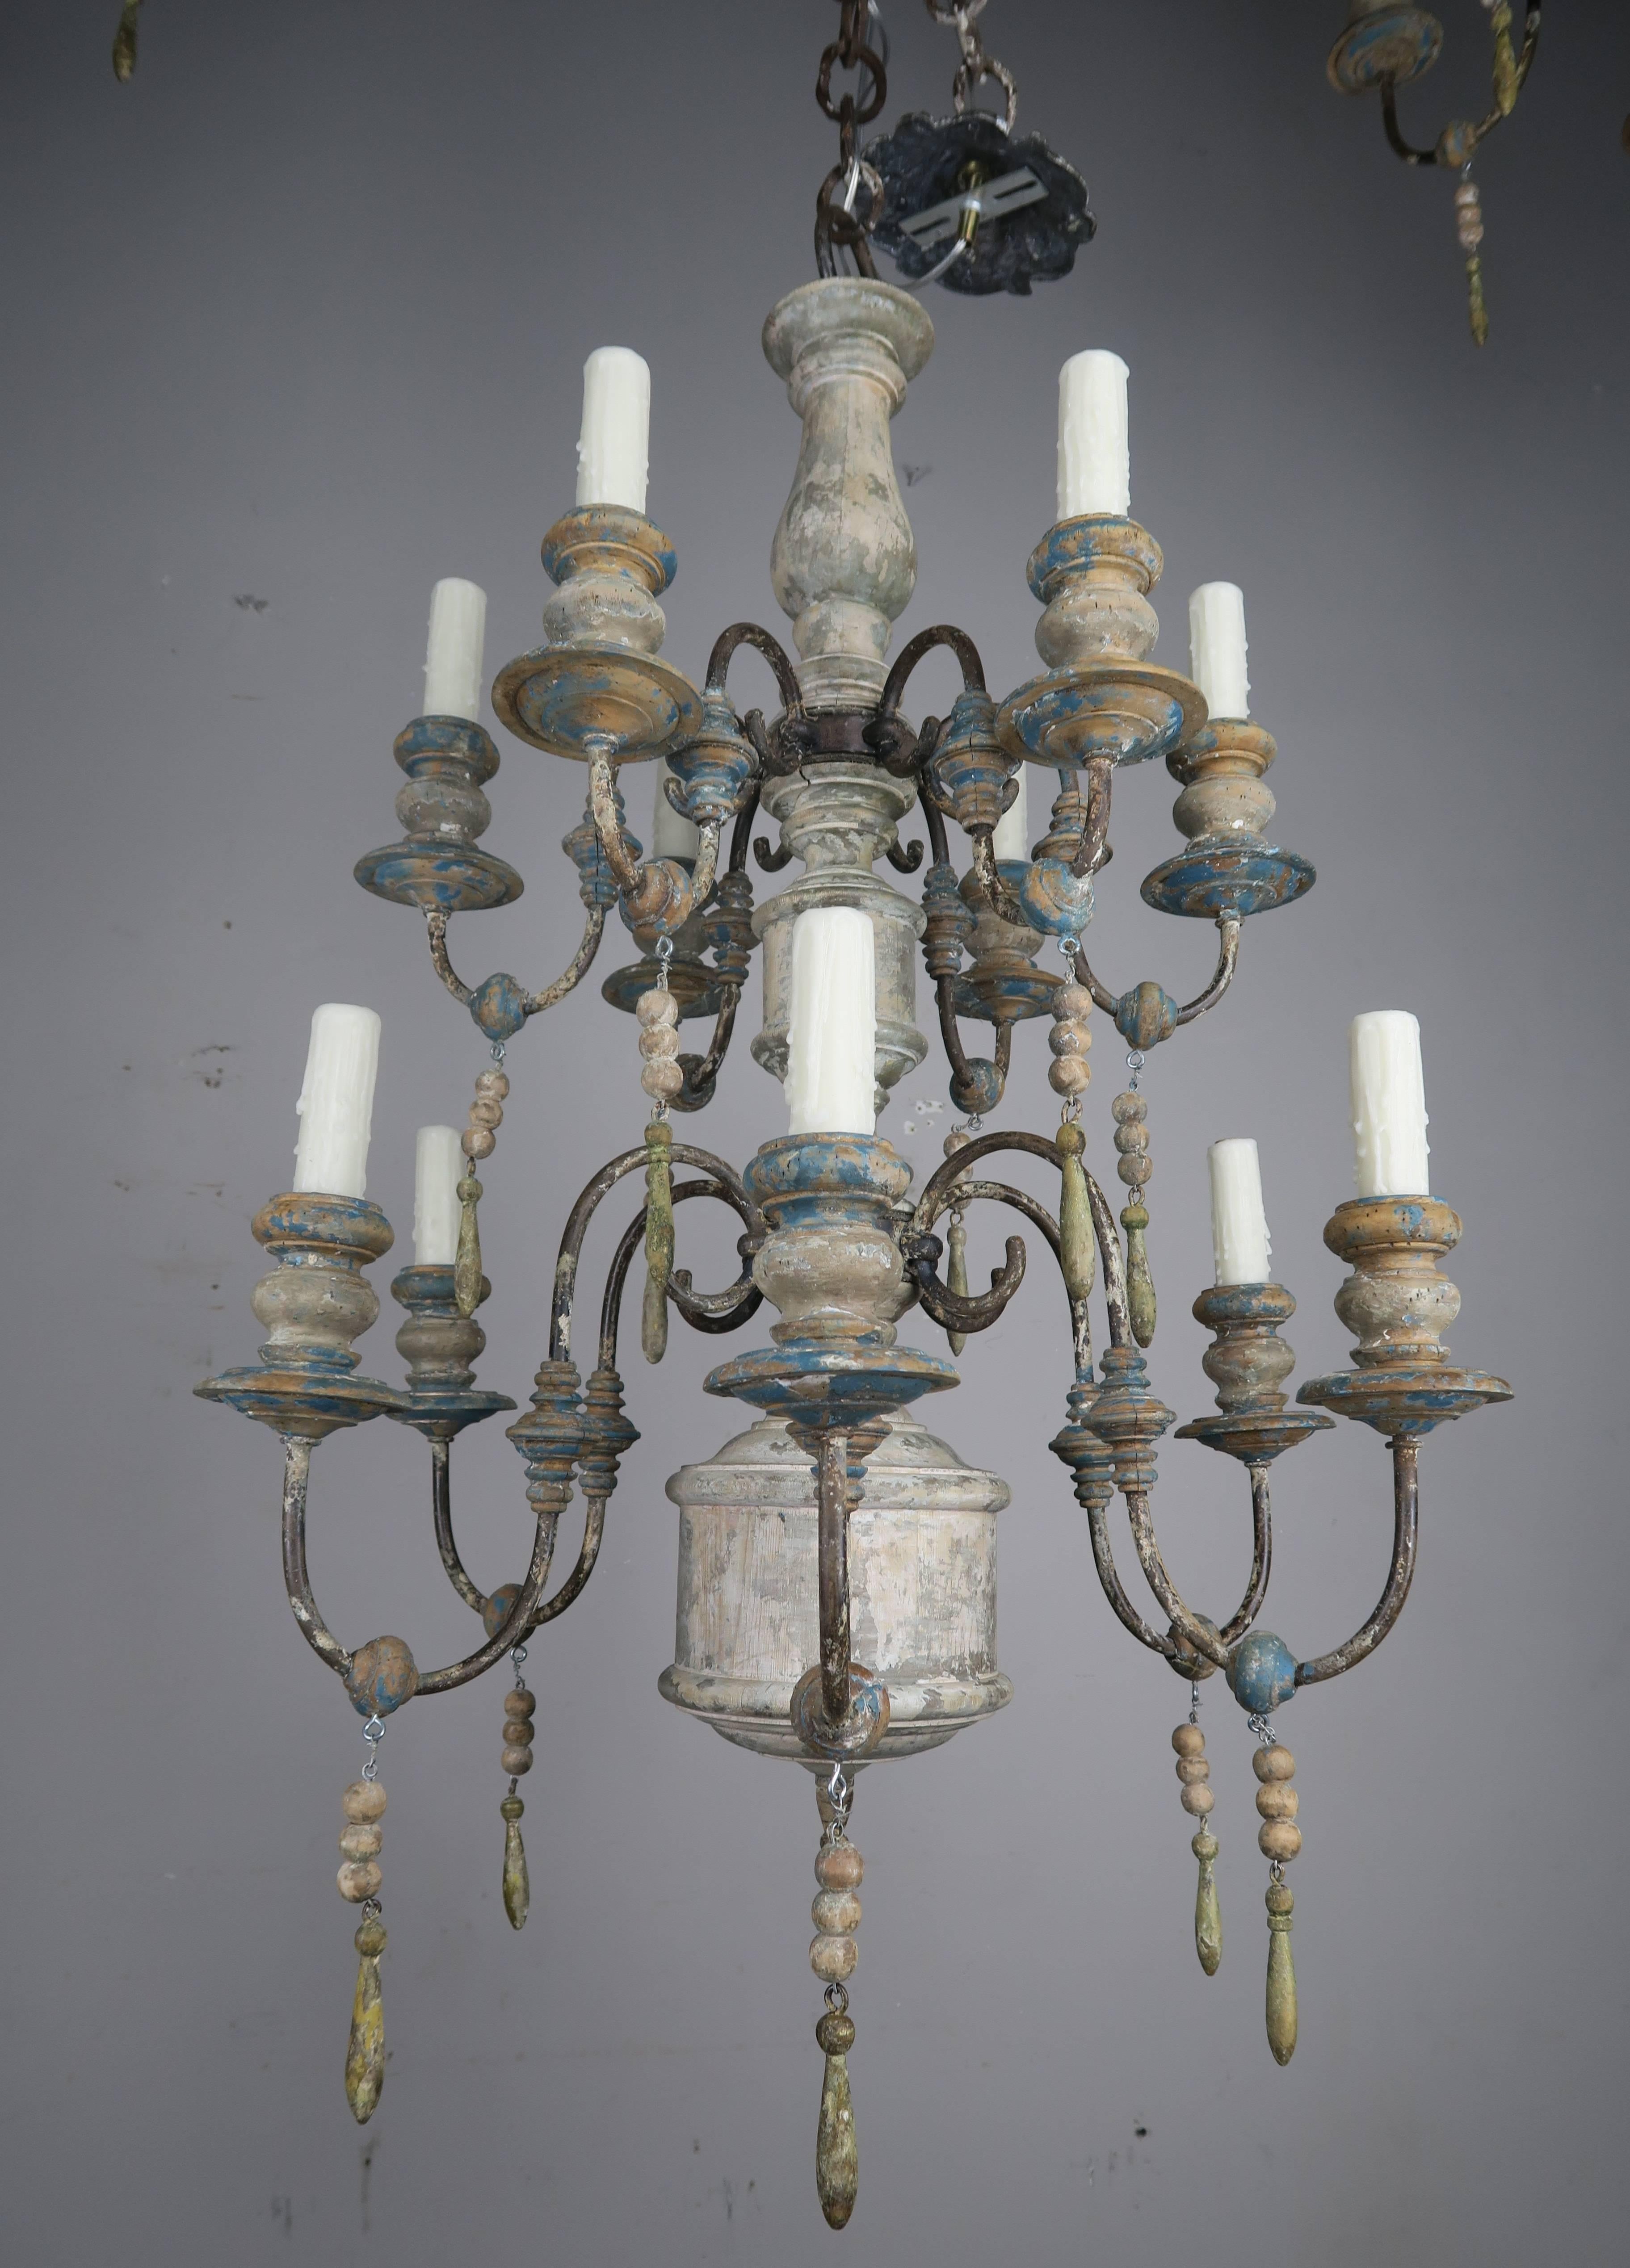 Pair of twelve-light wood and iron painted chandeliers with wood drops throughout. The chandeliers have been newly rewired with drip wax candle covers. Chain and canopies included.